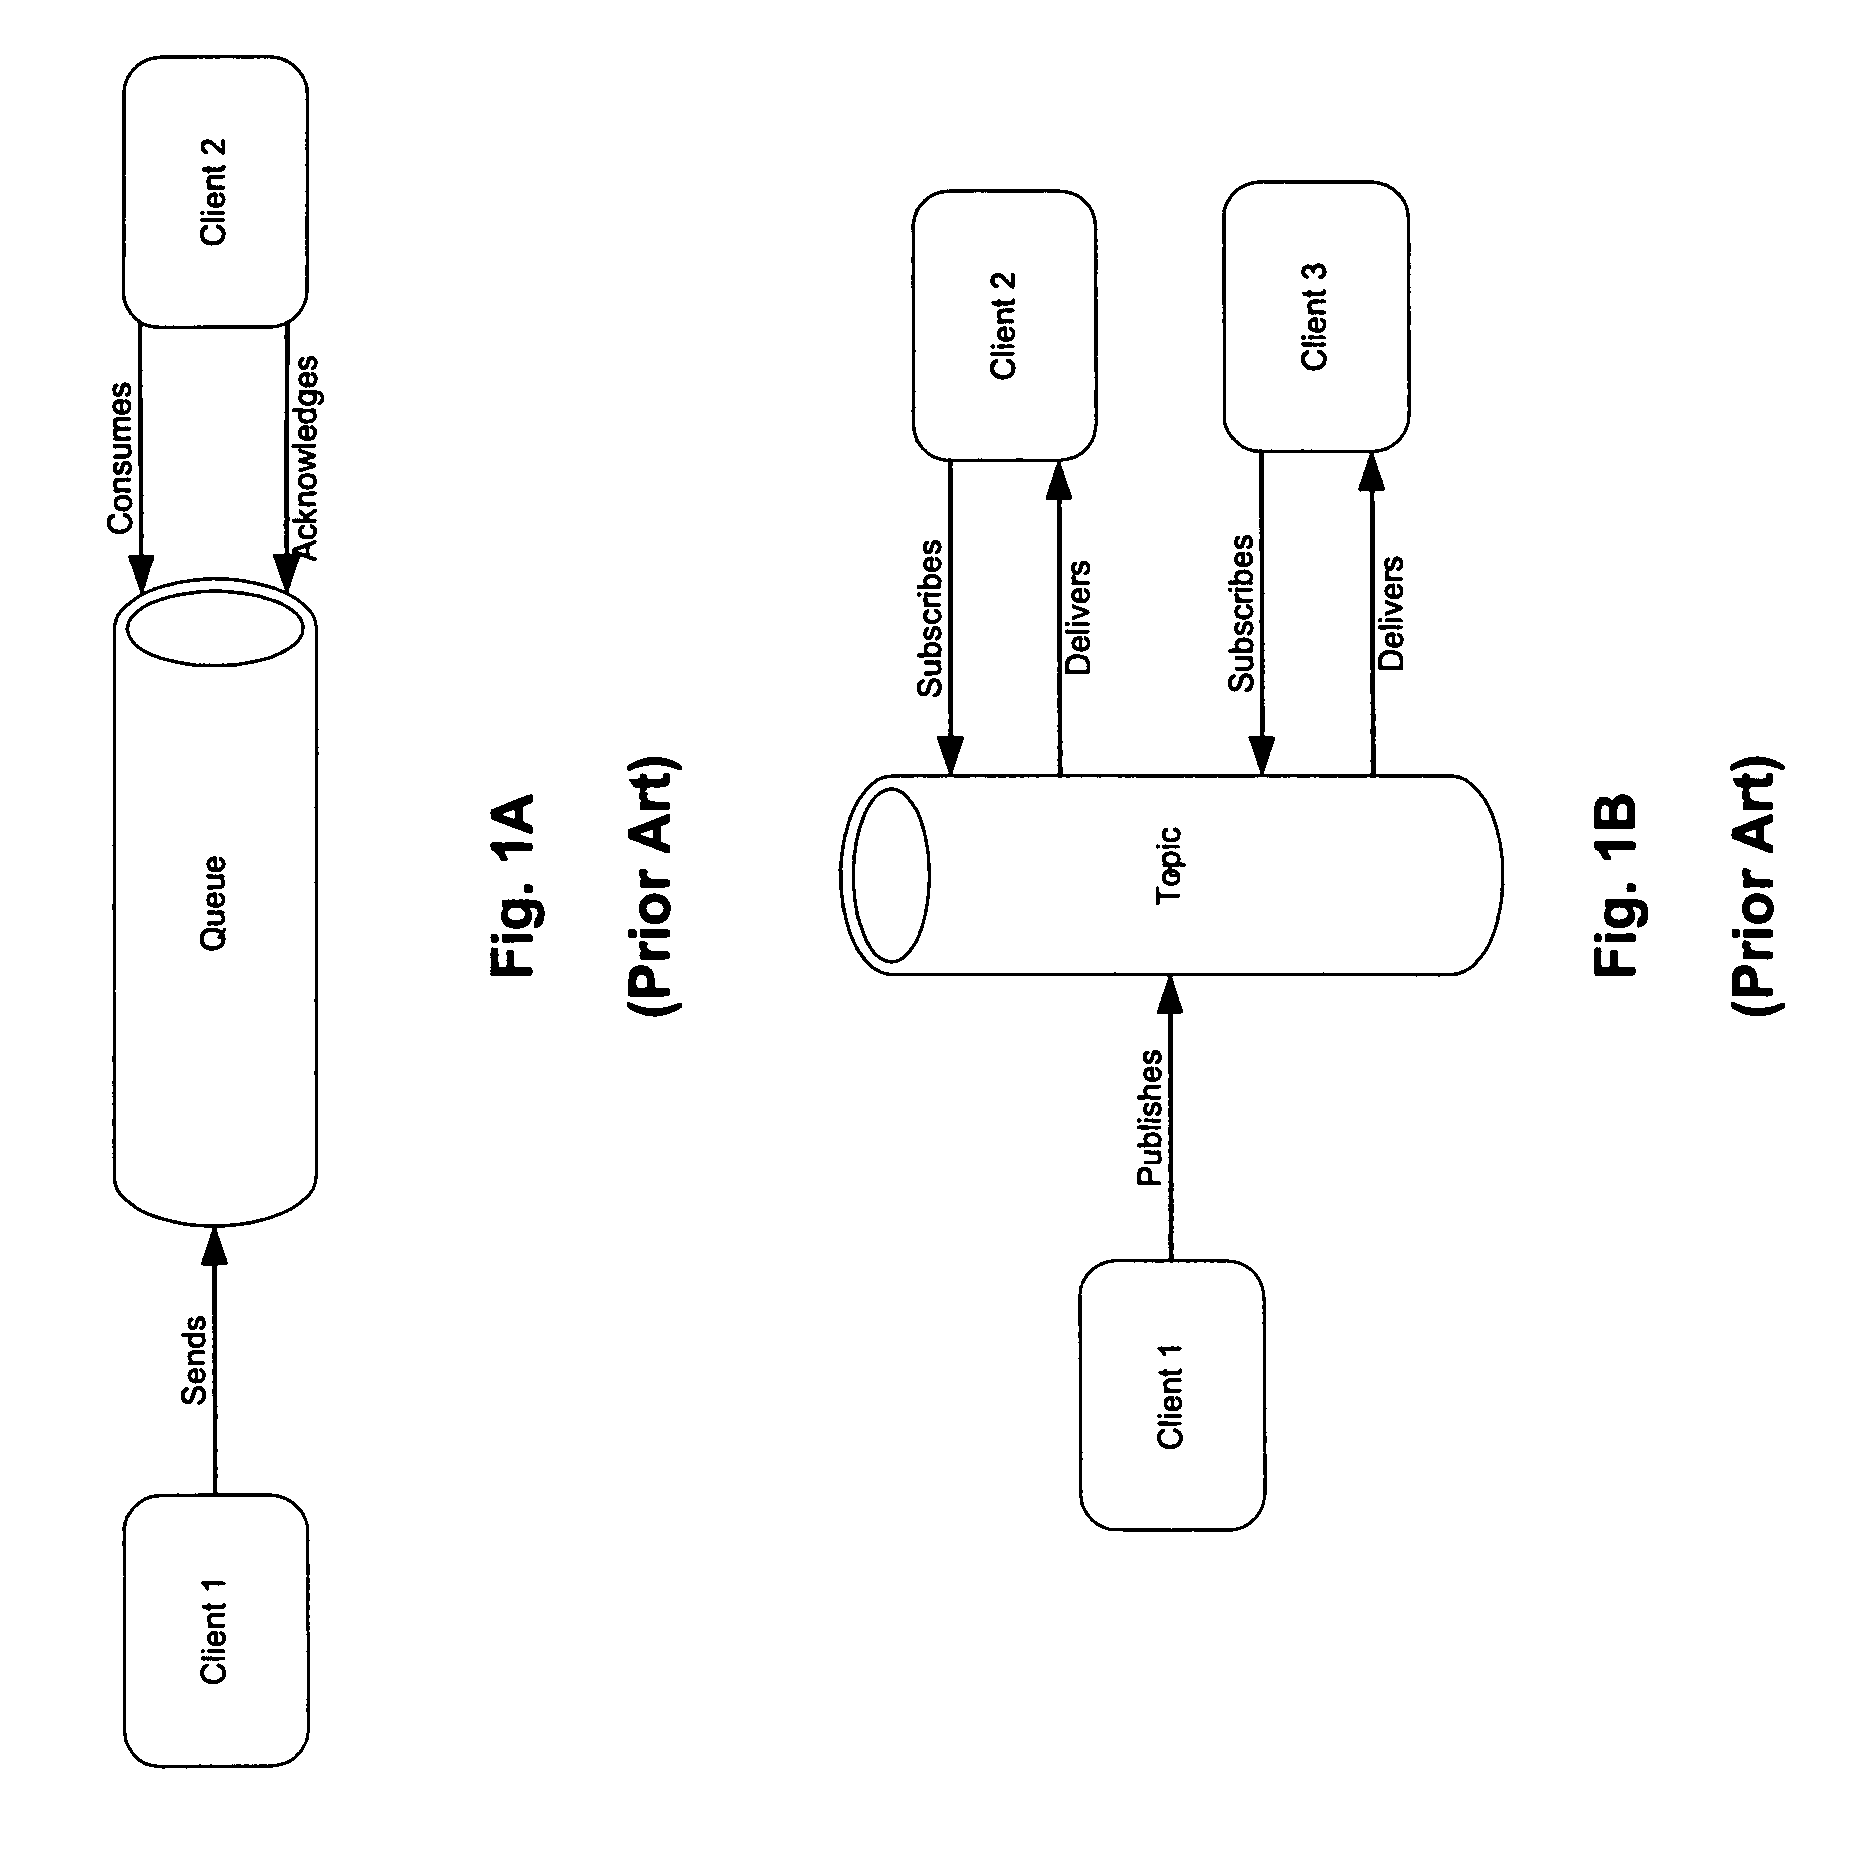 Methods and apparatus for subscribing/publishing messages in an enterprising computing environment